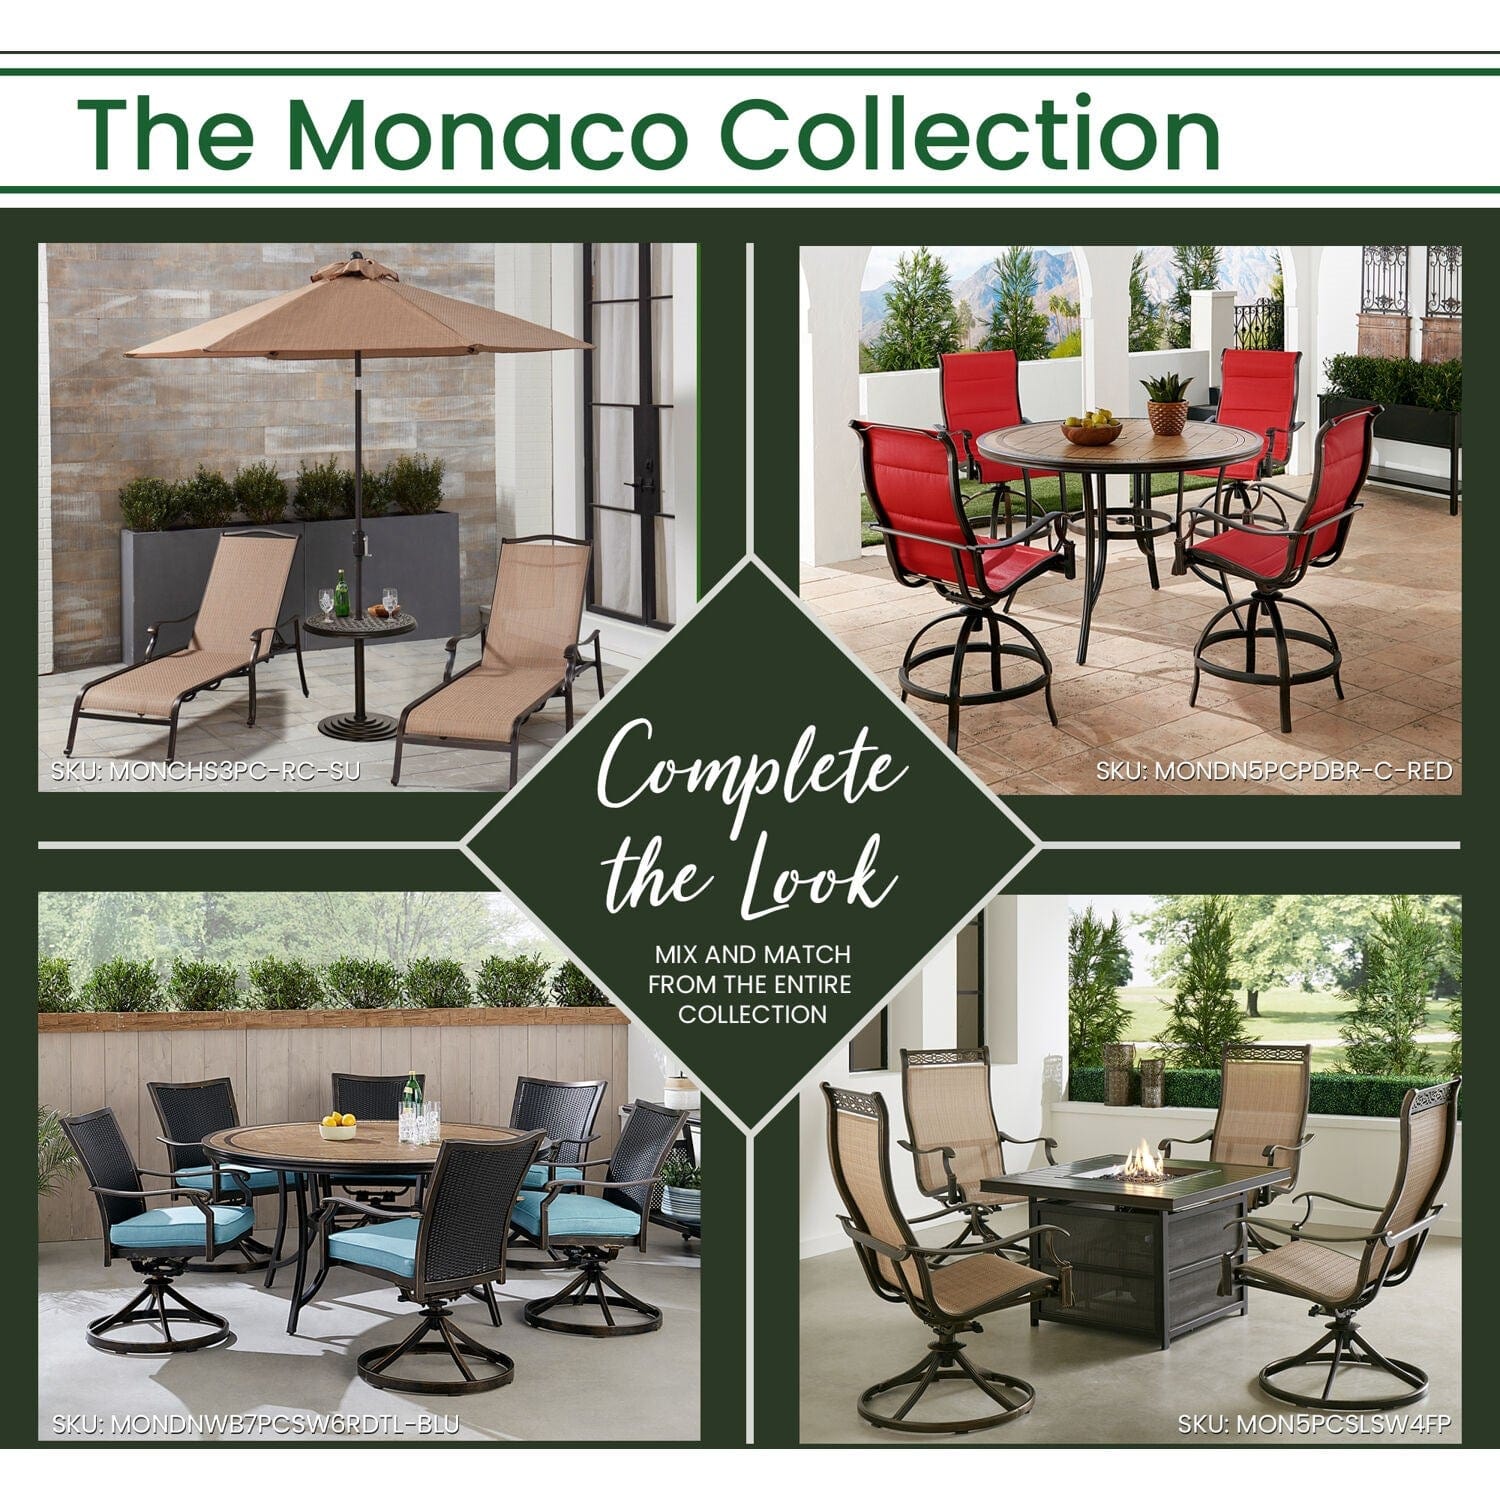 Hanover Outdoor Dining Set Hanover - Monaco 7-Piece Dining Set with Six Sling-back Dining Chairs and One Extra Large Glass-top Dining Table | MONDN7PCG